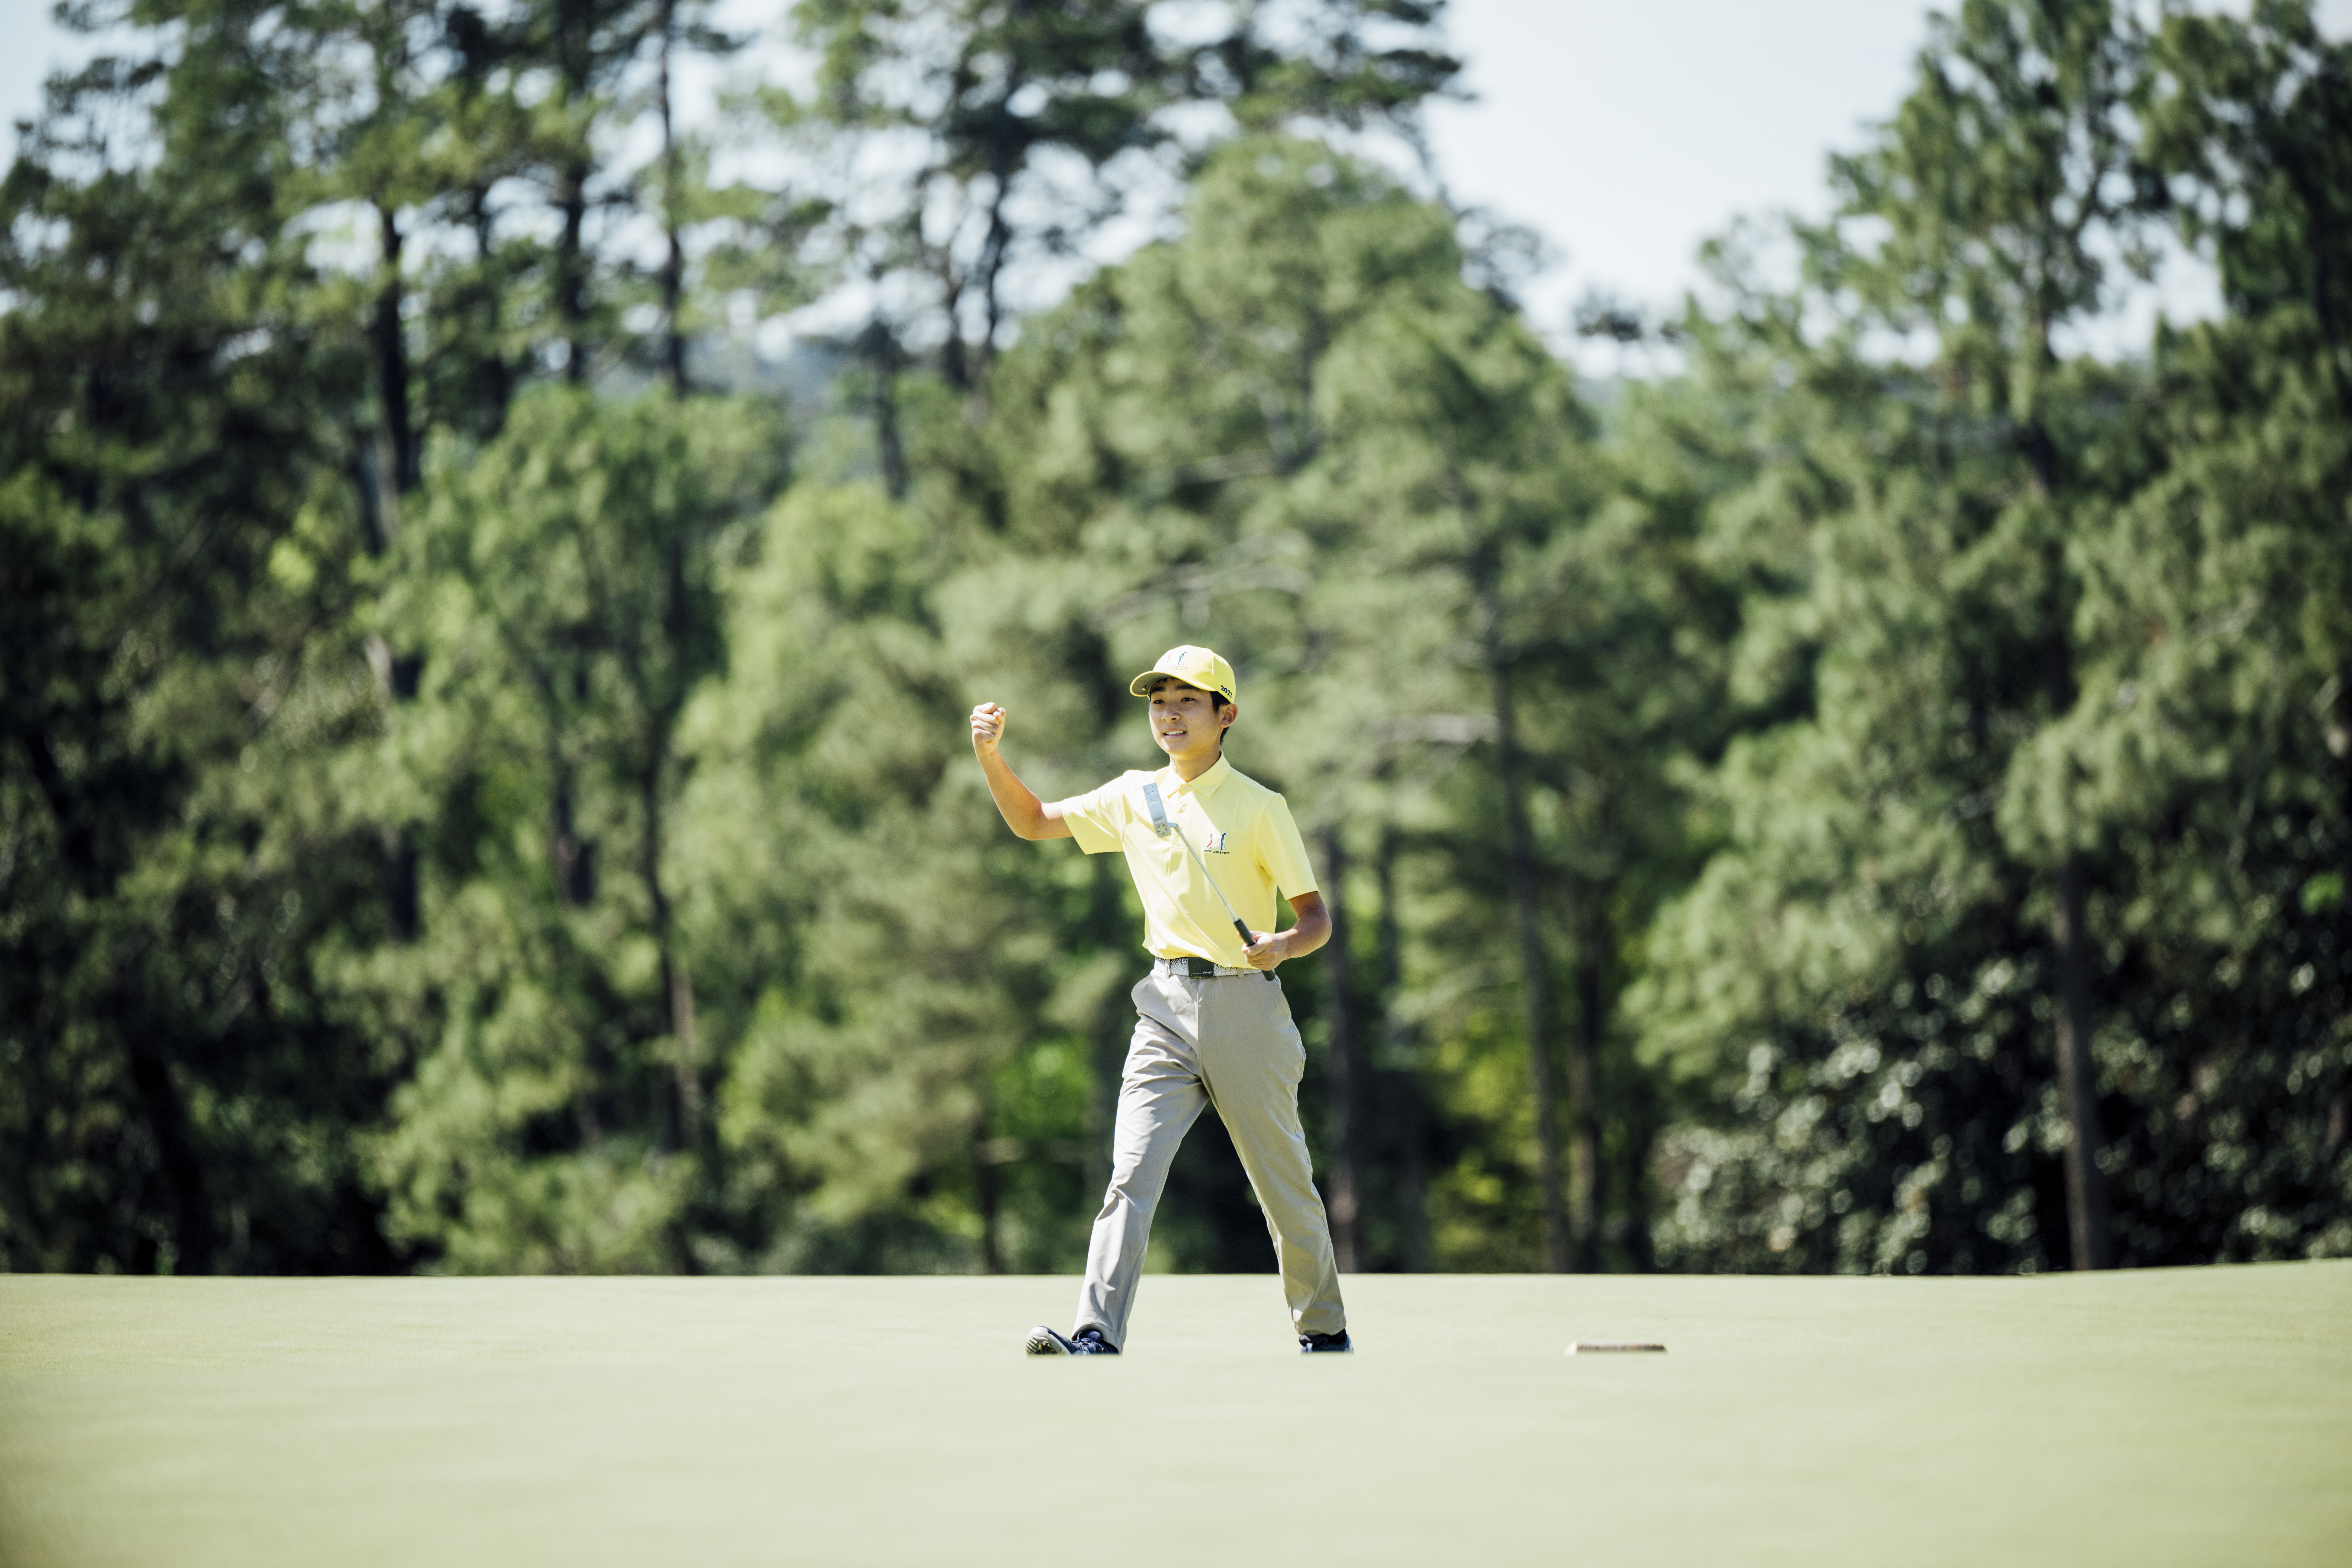 Leo Saito of the Boys 12-13 division fist pumps during the Drive, Chip & Putt National Finals at Augusta National Golf Club on Sunday, April 2, 2023. (Logan Whitton/Augusta National Golf Club)